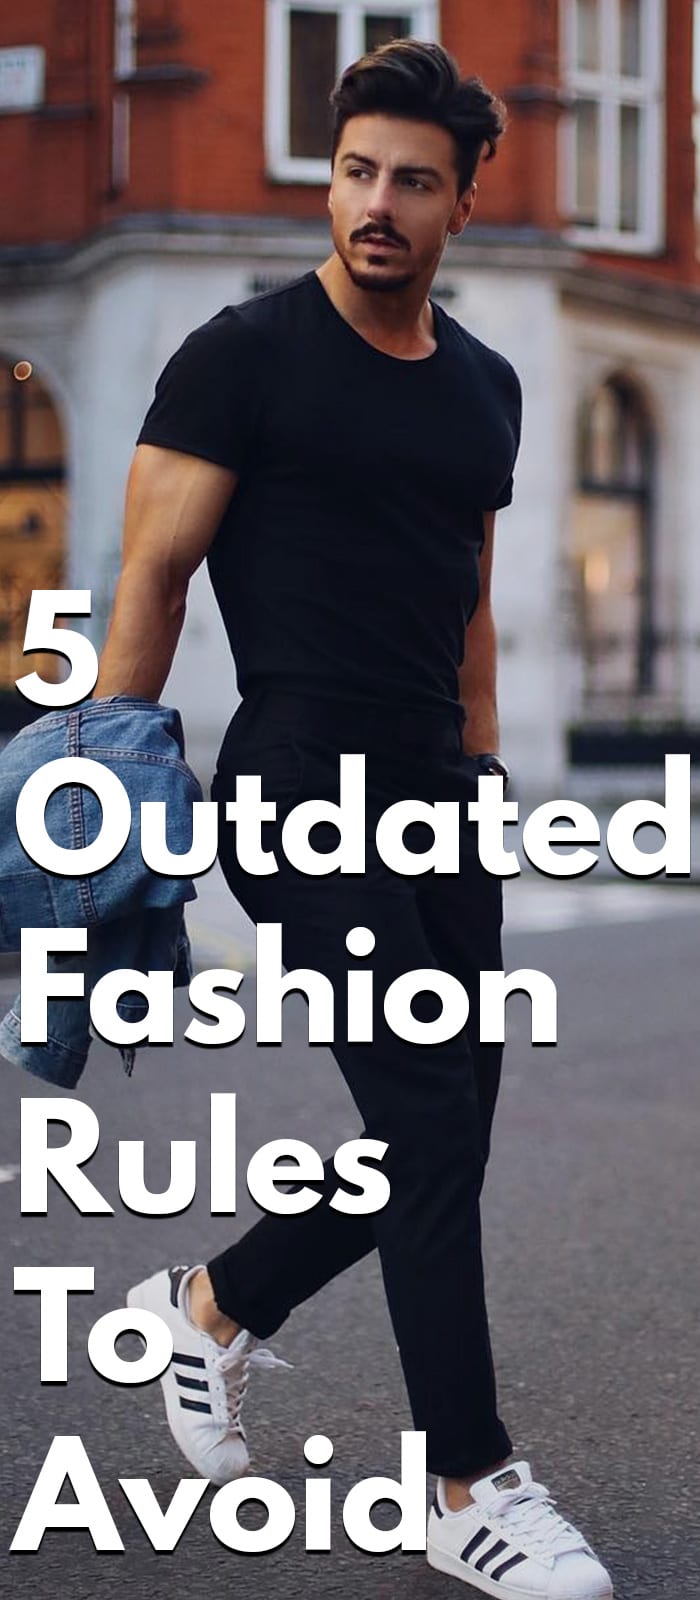 5 Outdated Fashion Rules To Avoid